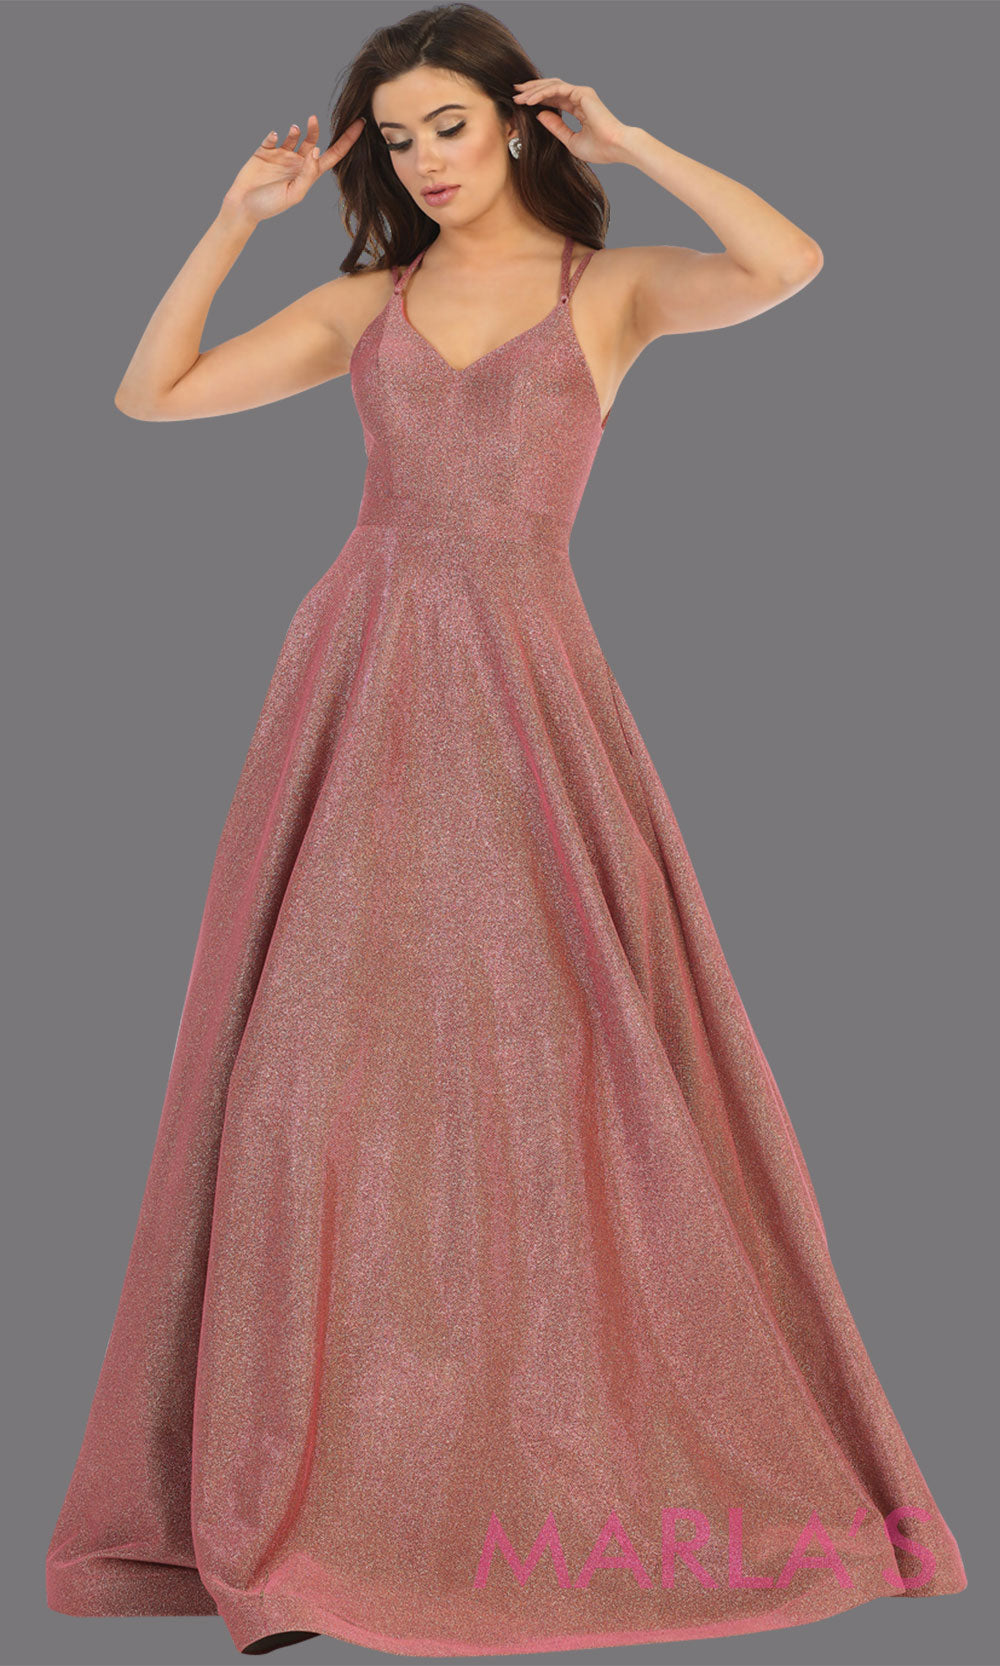 Long mauve v neck flowy open back dress from MayQueen RQ7751. This mauve metallic gown is perfect for prom, engagement party dress, engagement shoot, e shoot, sweeet 16, sweet 15, plus size formal party dress.